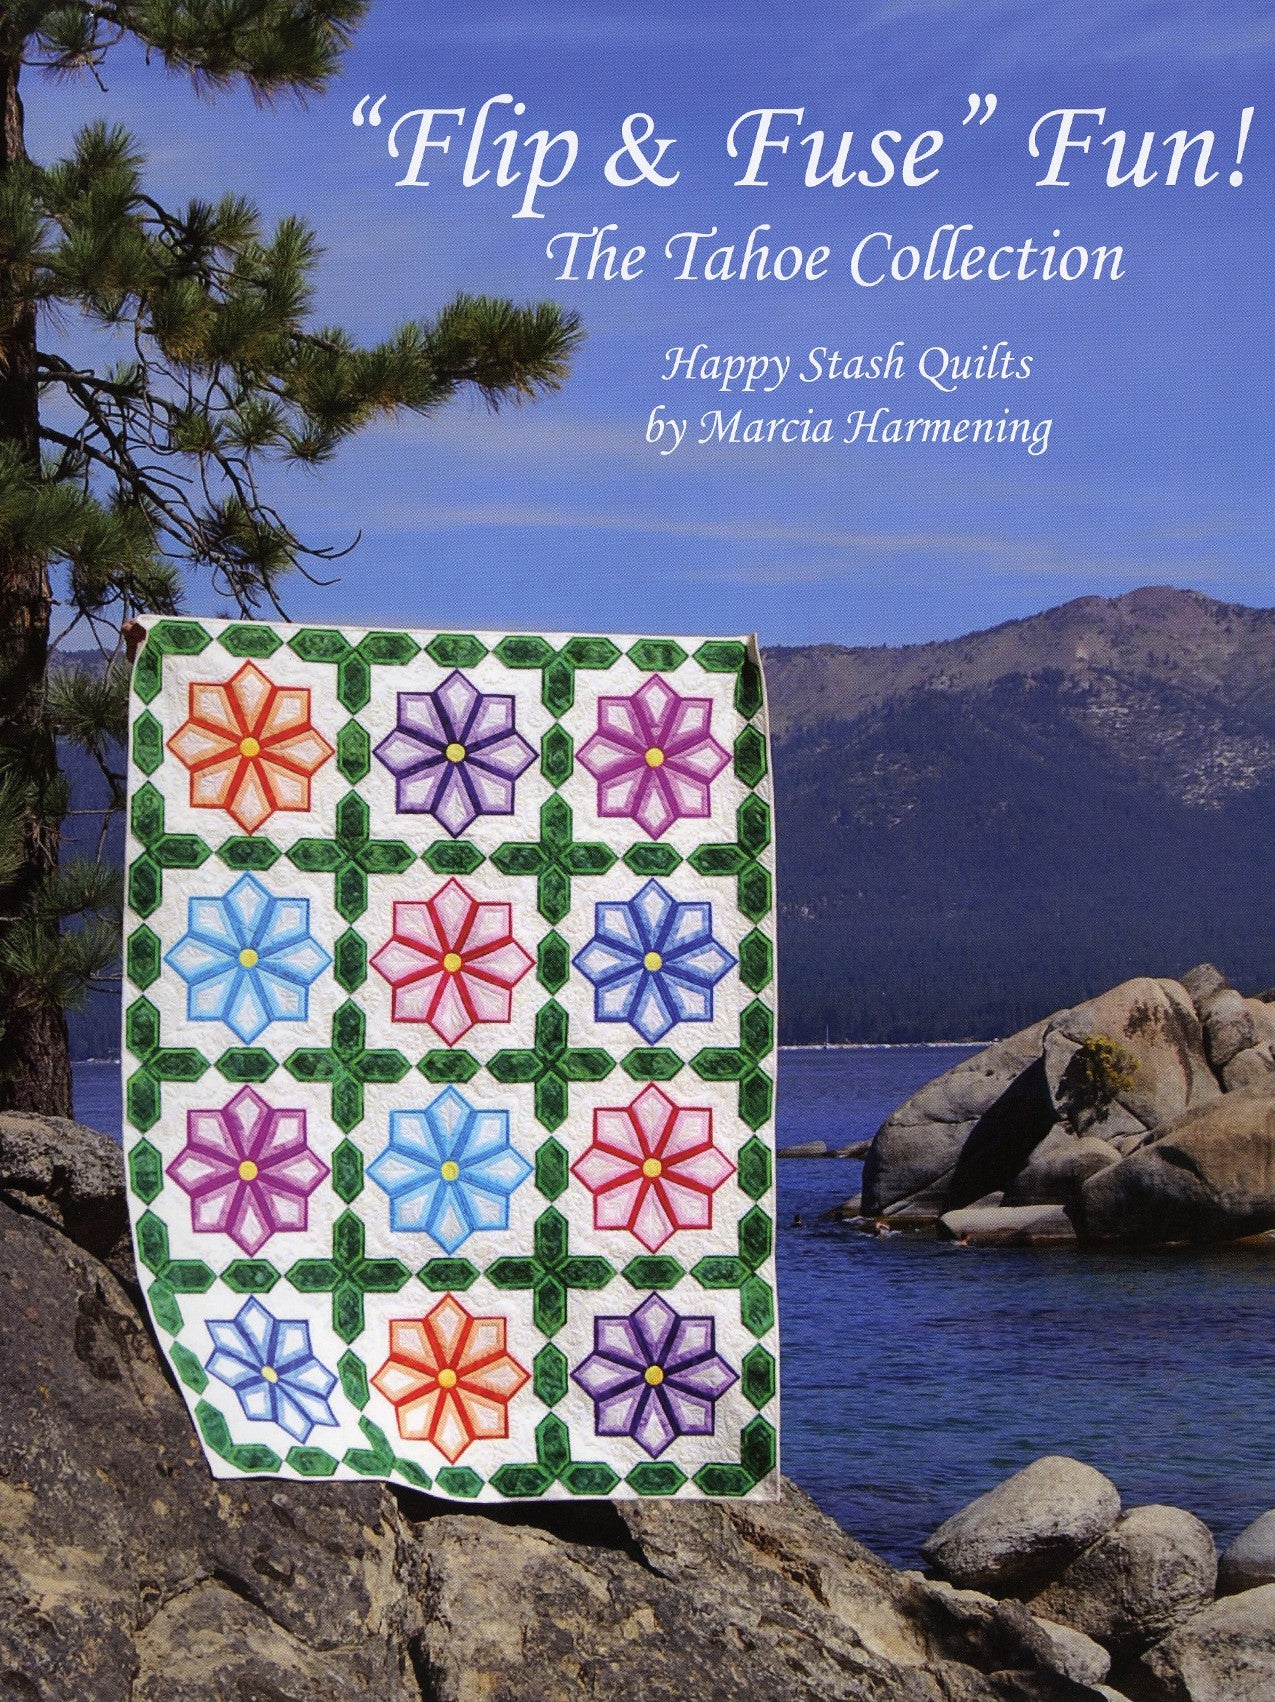 Flip And Fuse Fun, The Tahoe Collection Quilt Pattern Book by Marcia Harmening of Happy Stash Quilts